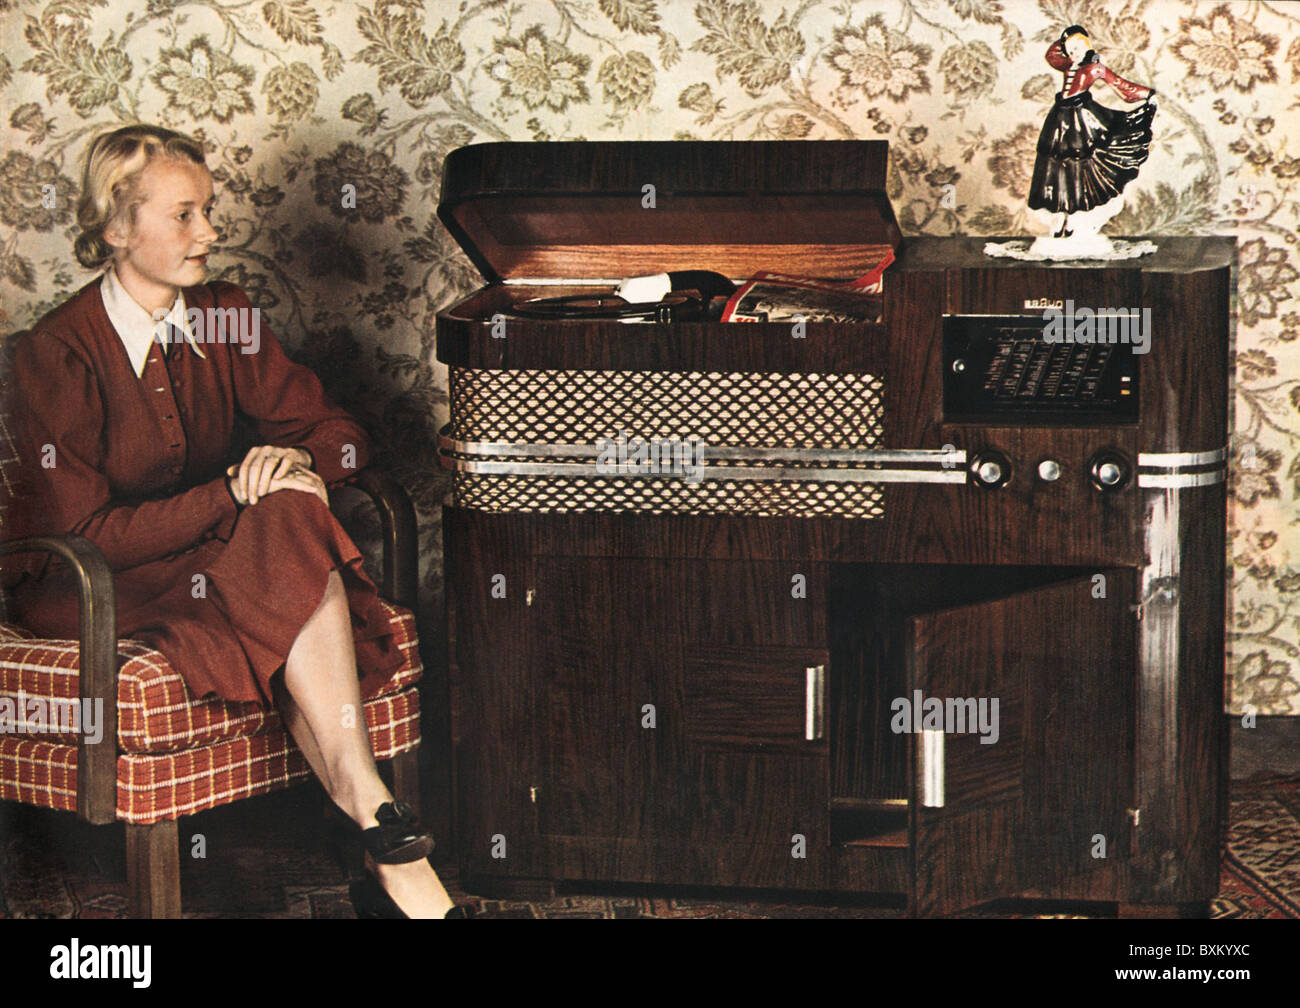 broadcast, radio, woman with Braun music chest 739, Germany, 1939, 1930s, 30s, 20th century, historic, historical, record player, record players, combined, radio set, radio, radio sets, radios, home electronics, consumer electronics, entertainment electronics, home entertainment, furniture, sitting, audio, phono, sound, listener, listeners, cabinet, people, nostalgia, women, female, Additional-Rights-Clearences-Not Available Stock Photo